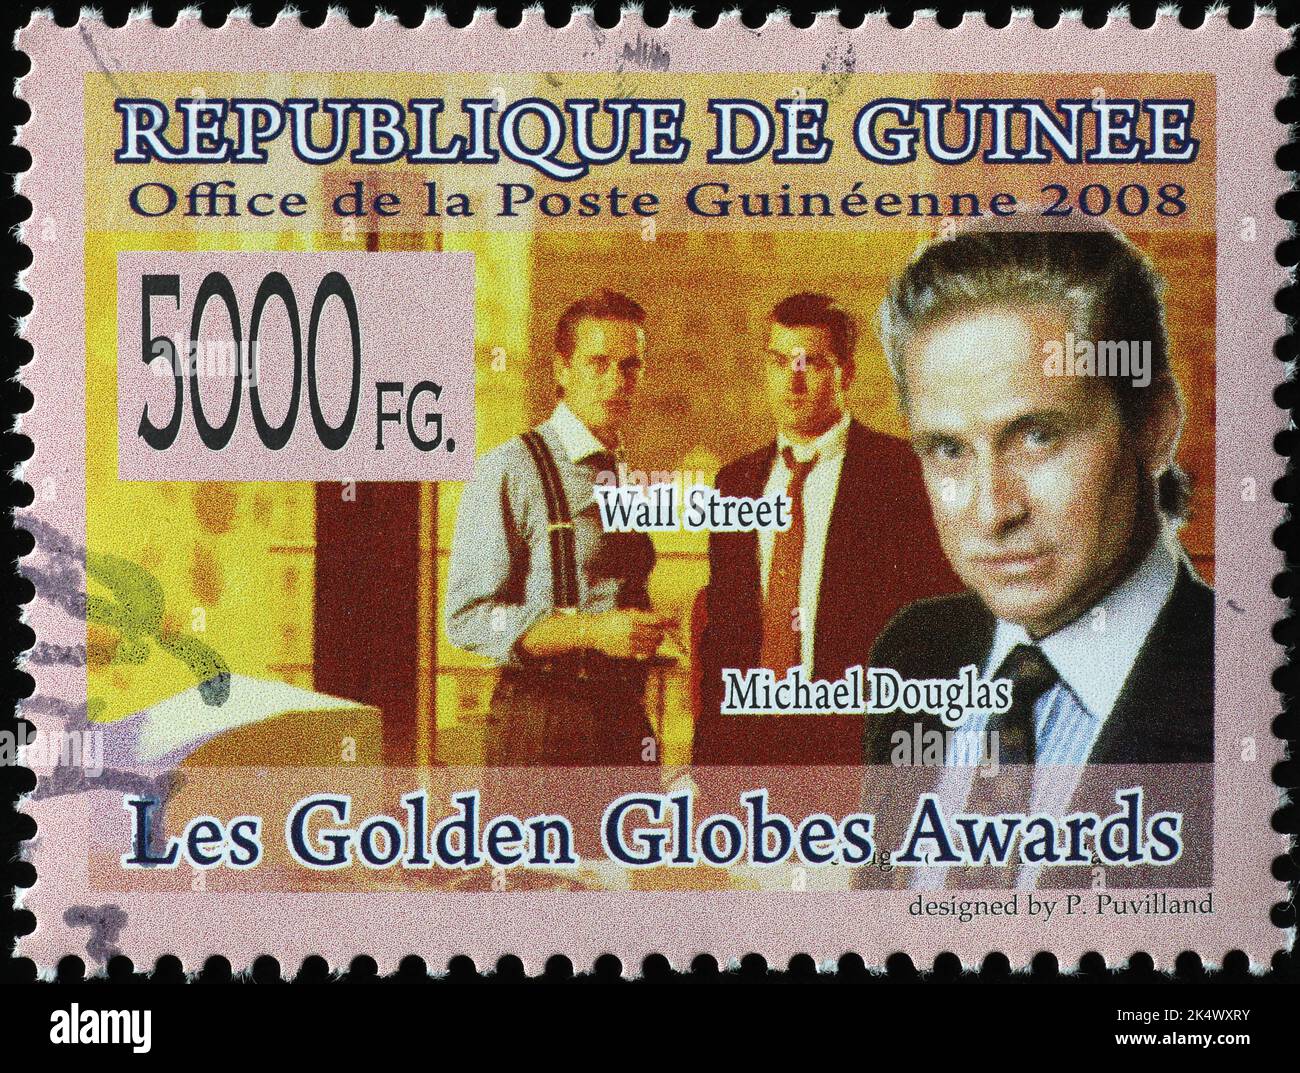 Michael Douglas in Wall Street on postage stamp Stock Photo